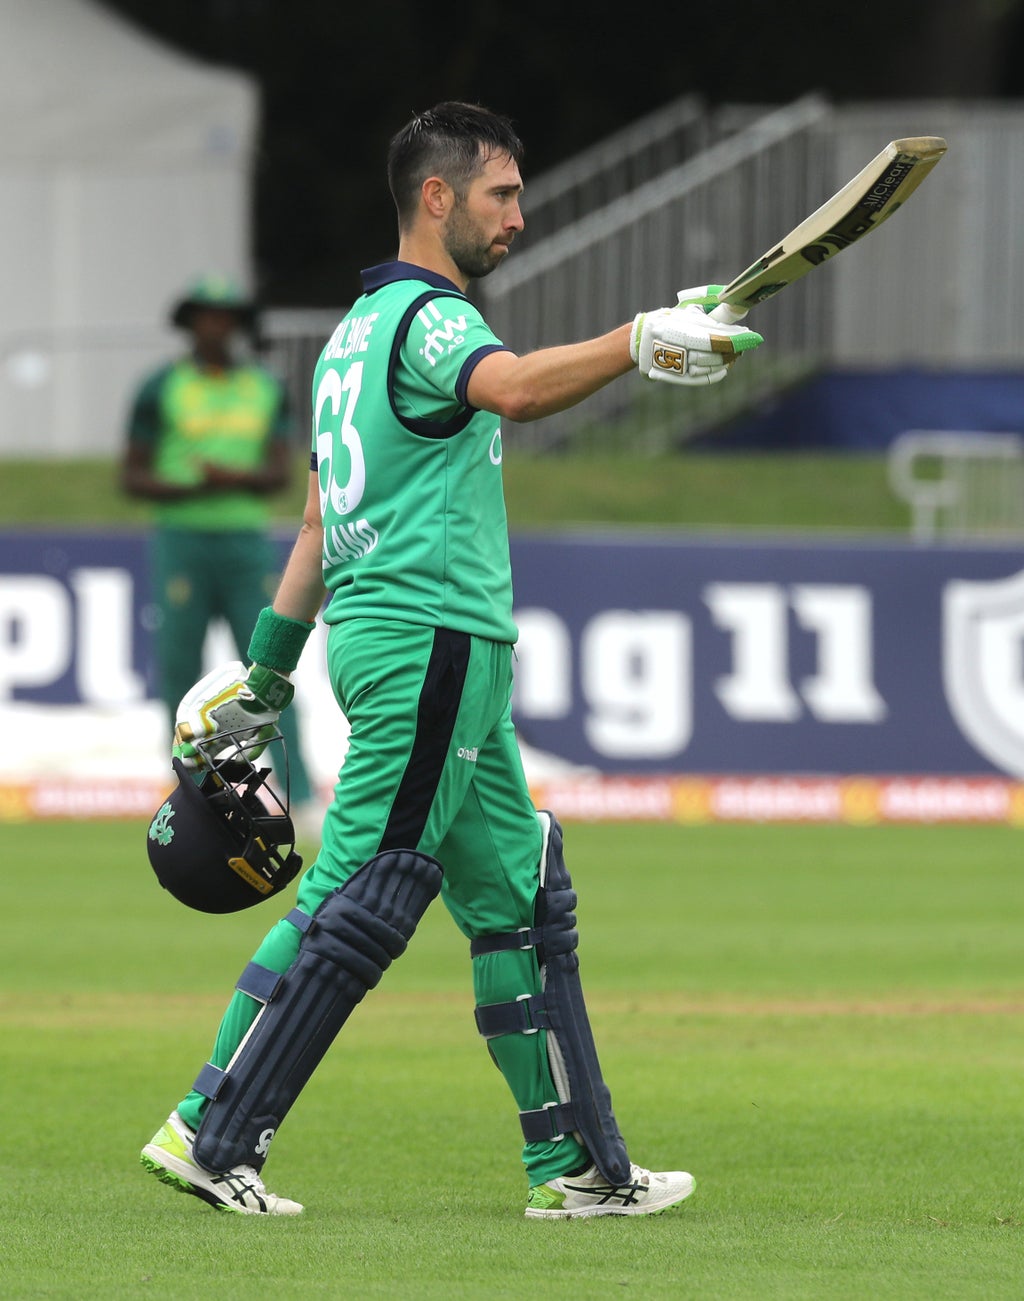 Andy Balbirnie hits ton as Ireland claim historic ODI victory over South Africa